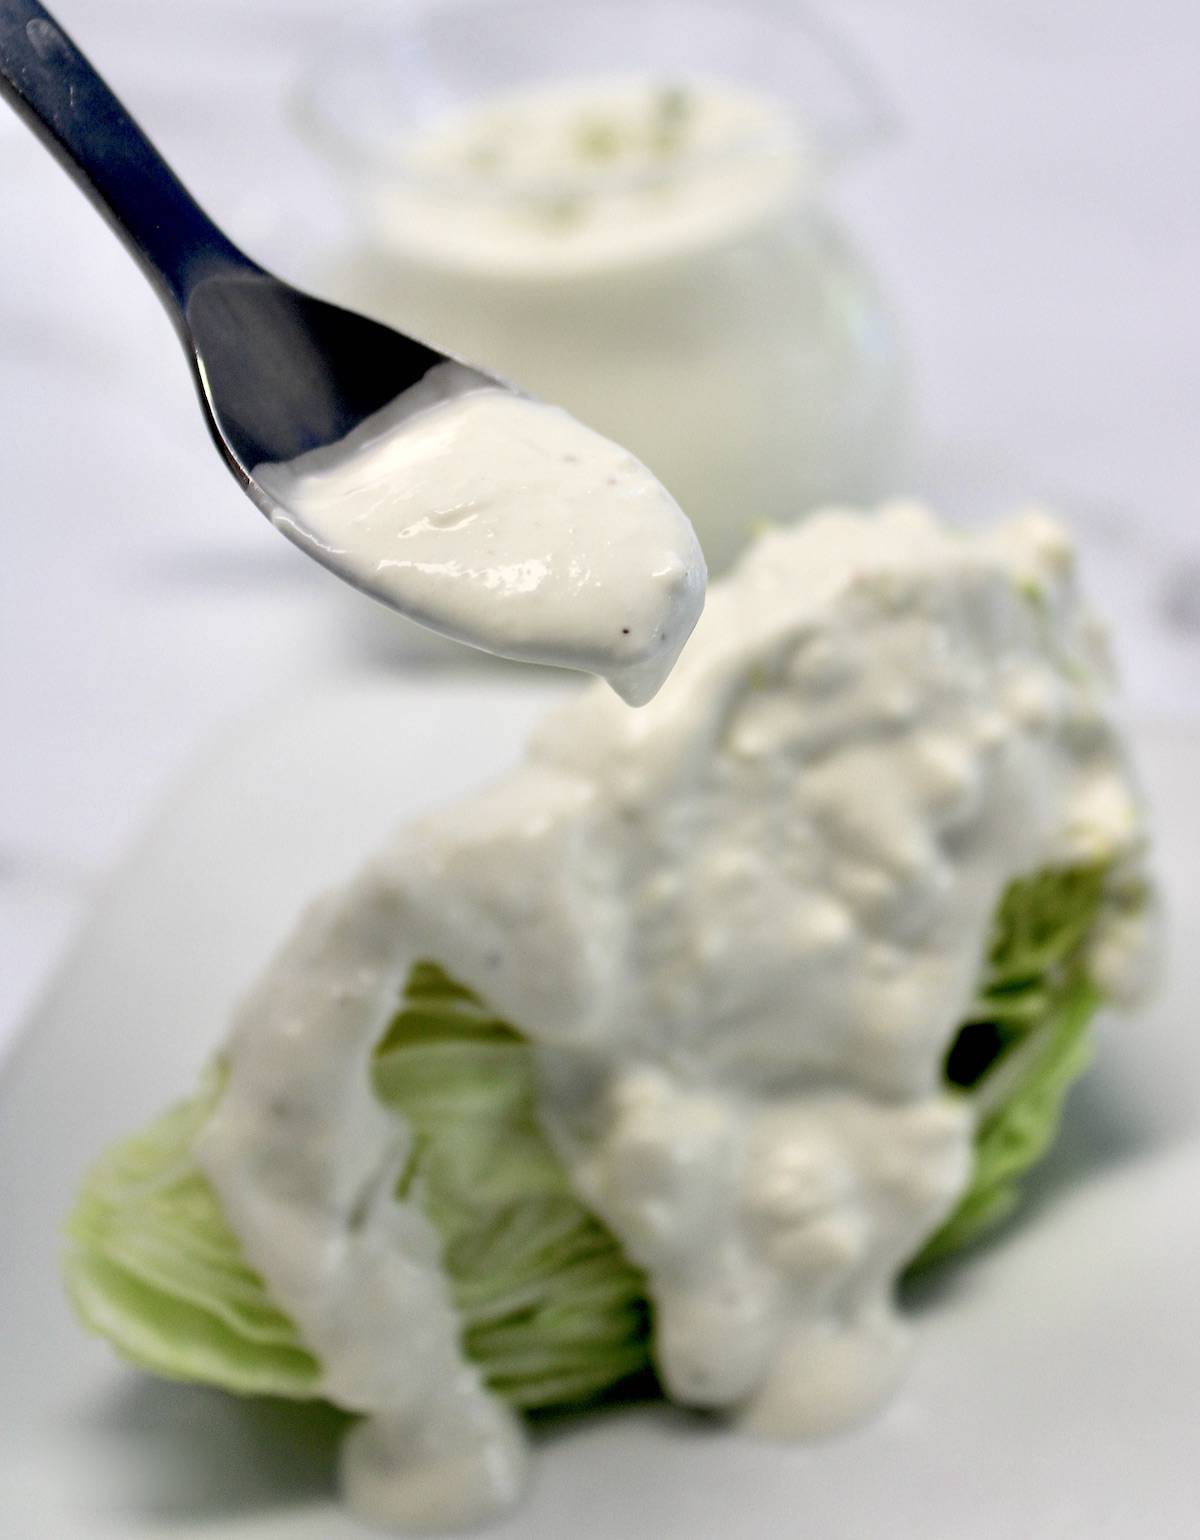 Keto Blue Cheese Dressing being spooned over iceberg wedge on white plate